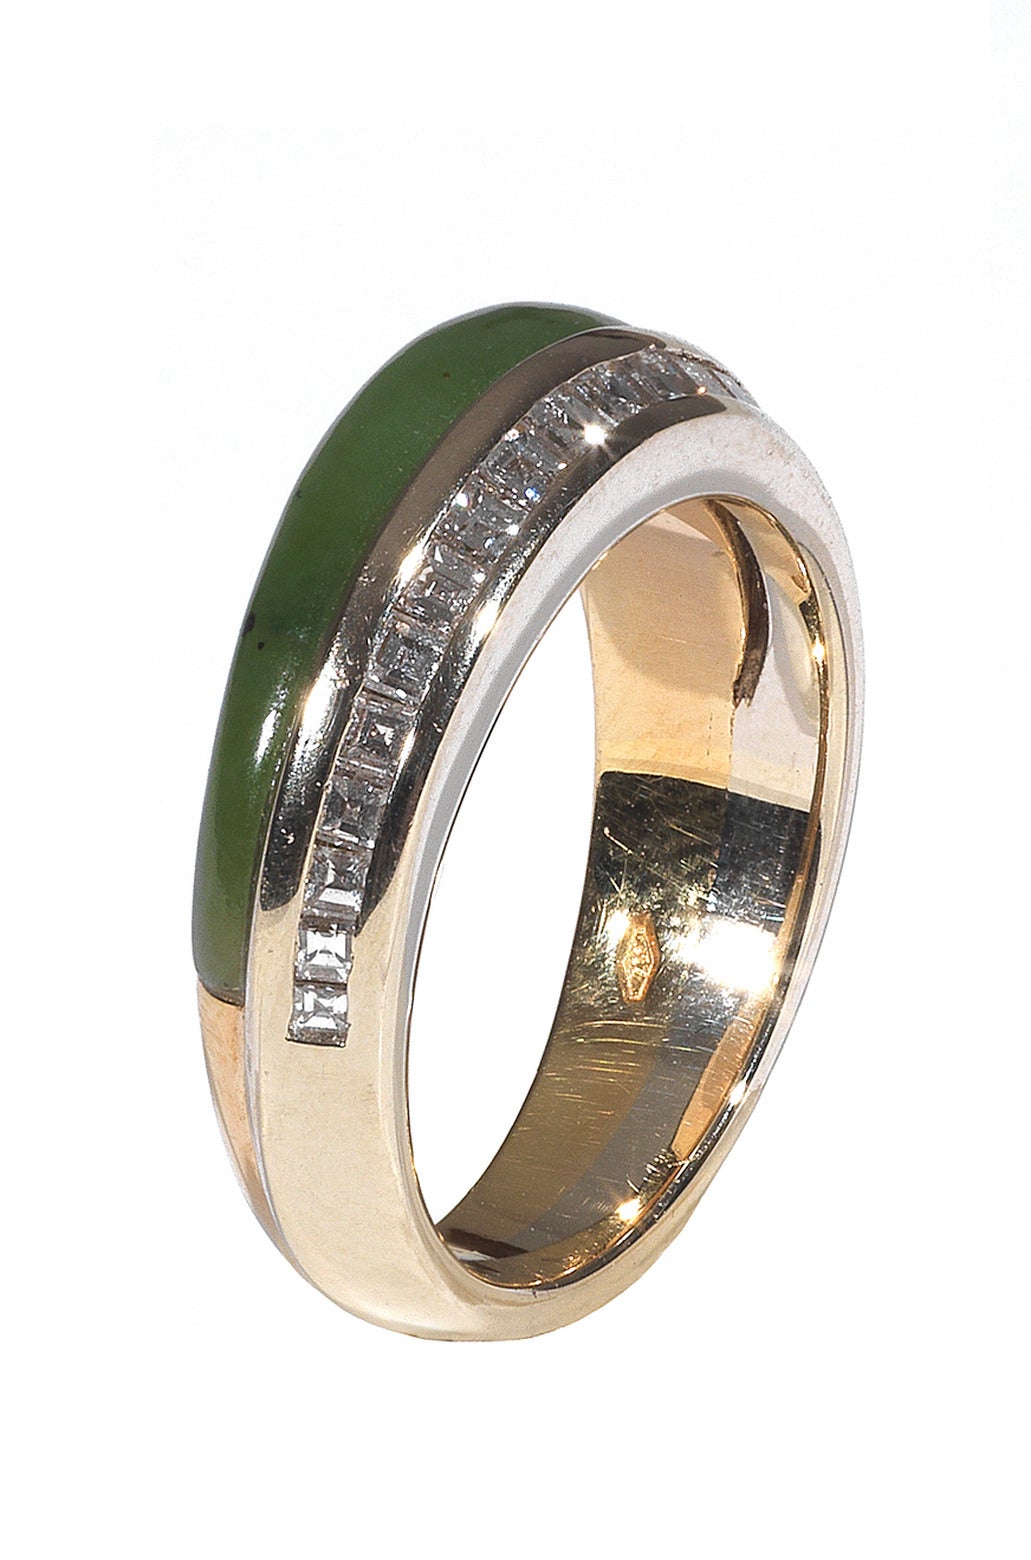 
Of Modernist design with deep green jade and carre cut diamond.

Weight: 7.6 gr

Size 7